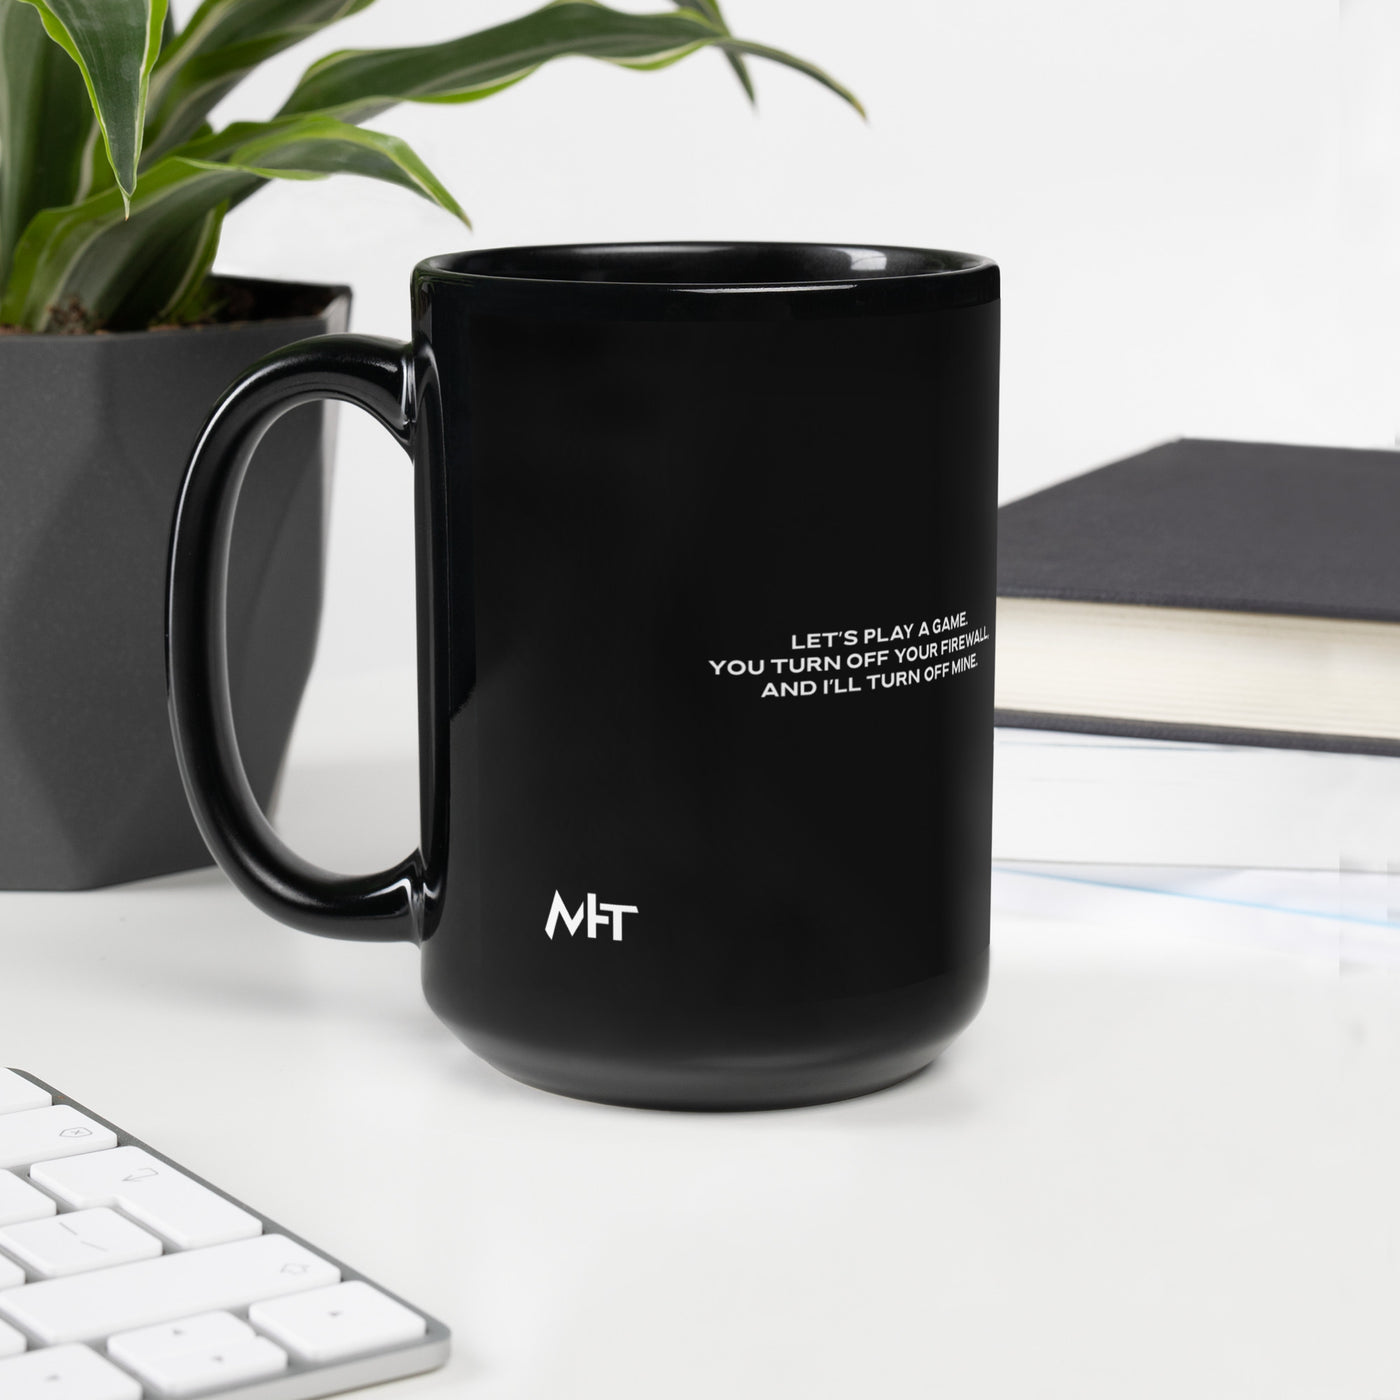 Let's Play a game: You Turn off your firewall and I'll Turn off mine - Black Glossy Mug